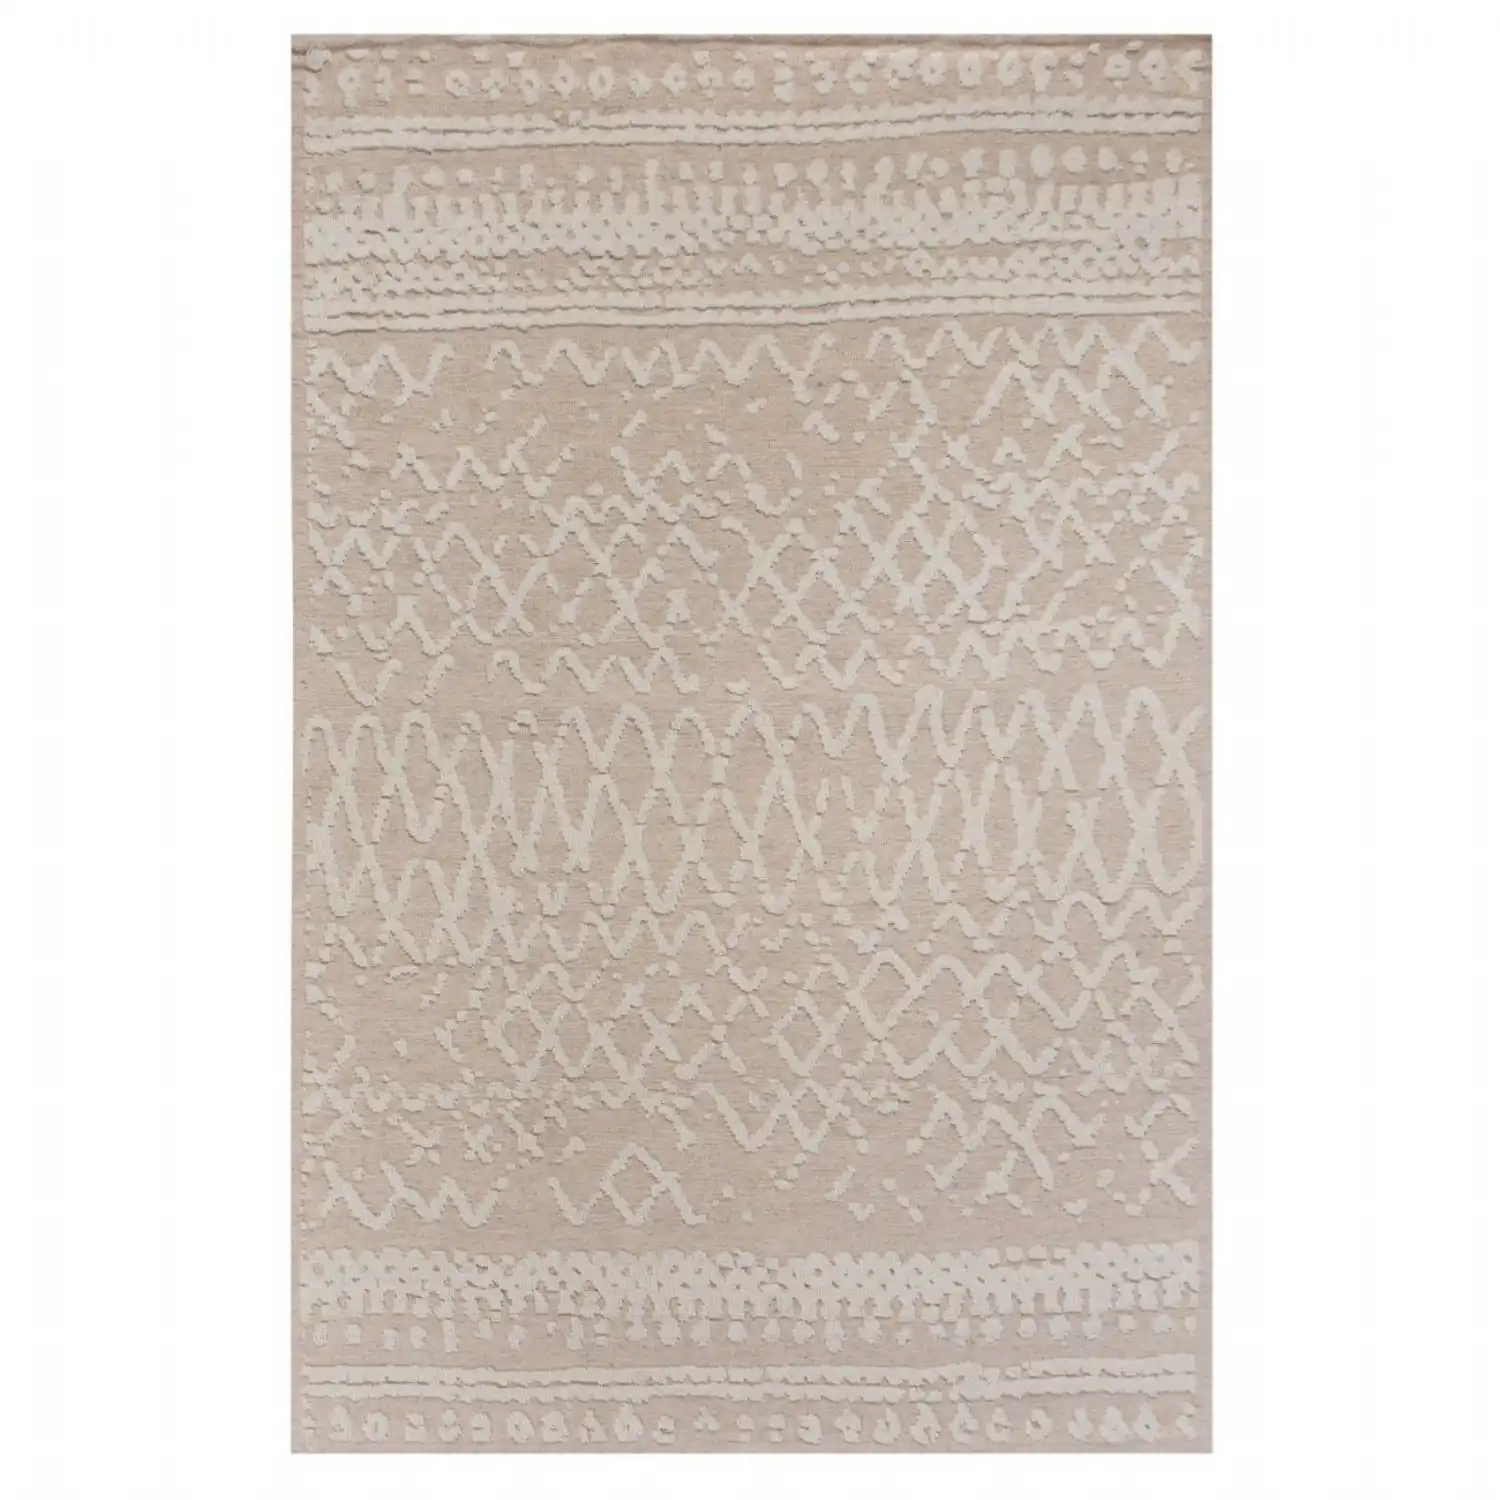 Knitted Beige and Ivory 160x230cm Wool Rug